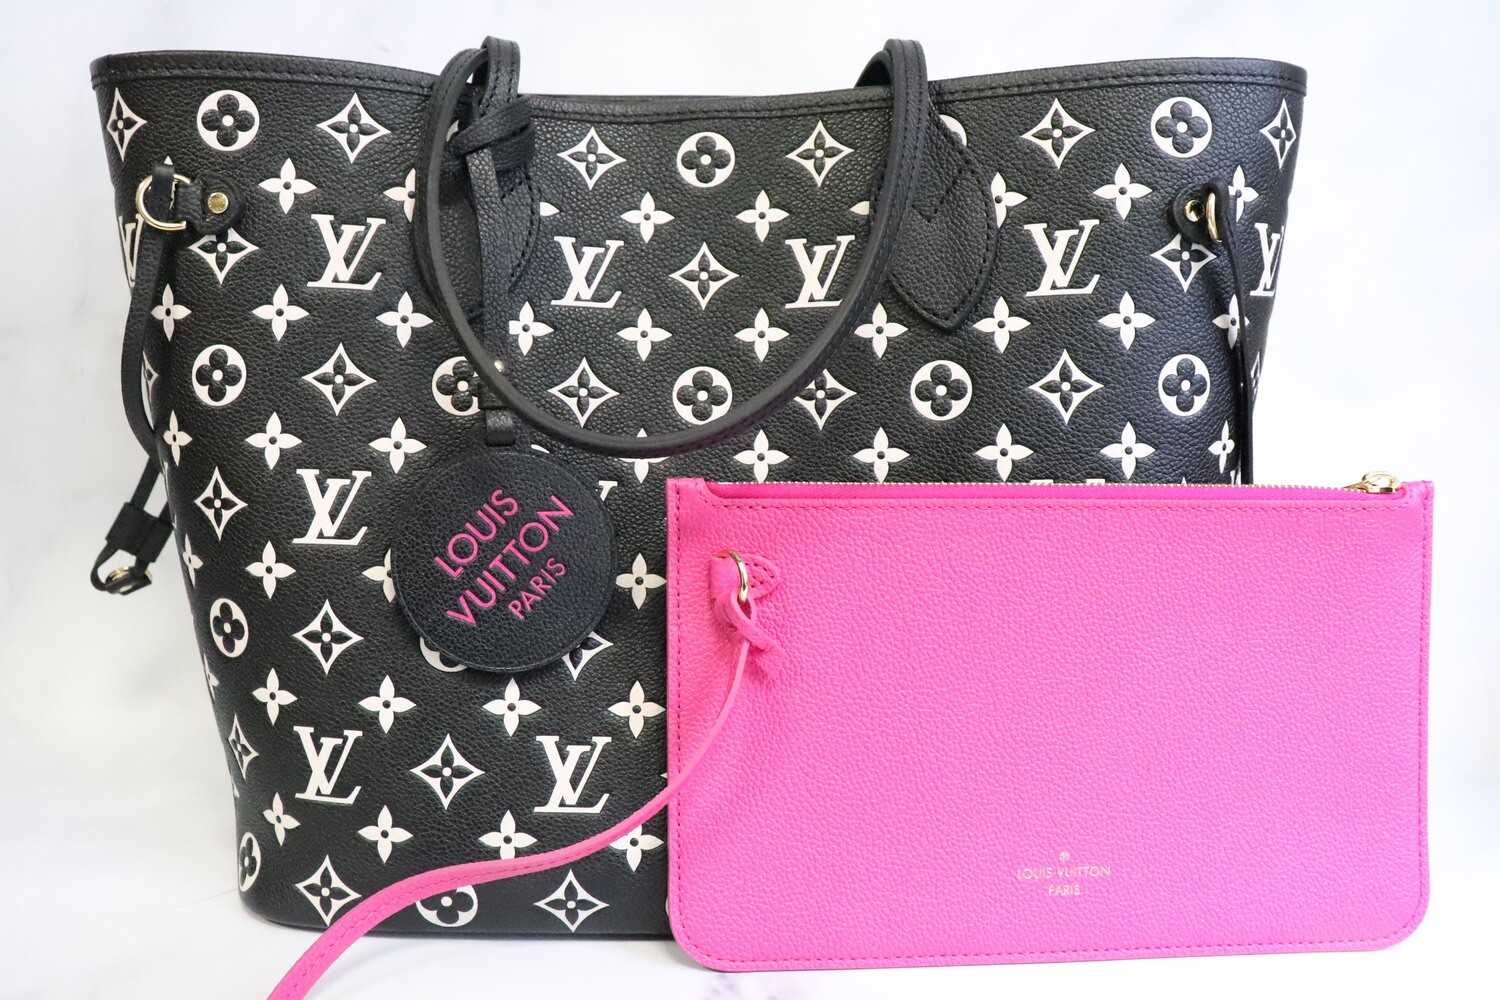 Louis Vuitton Neverfull MM with Pouch, Empreinte Leather Black and